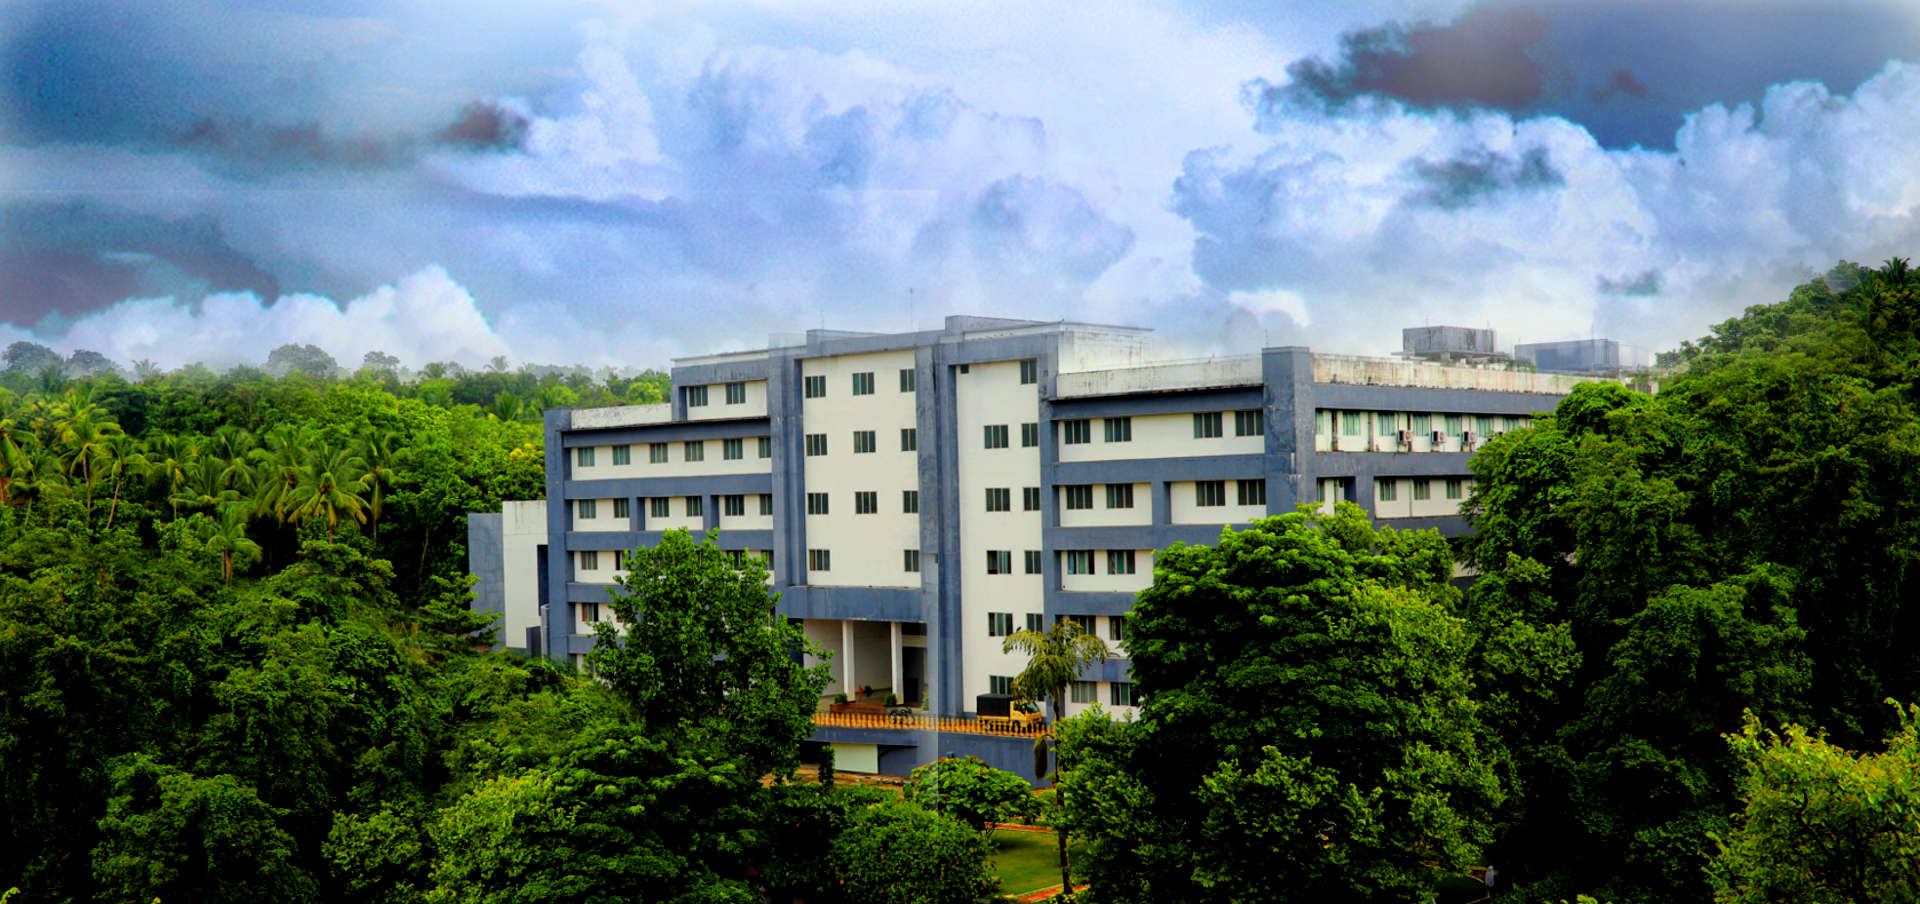 Jawaharlal college of engineering and technology